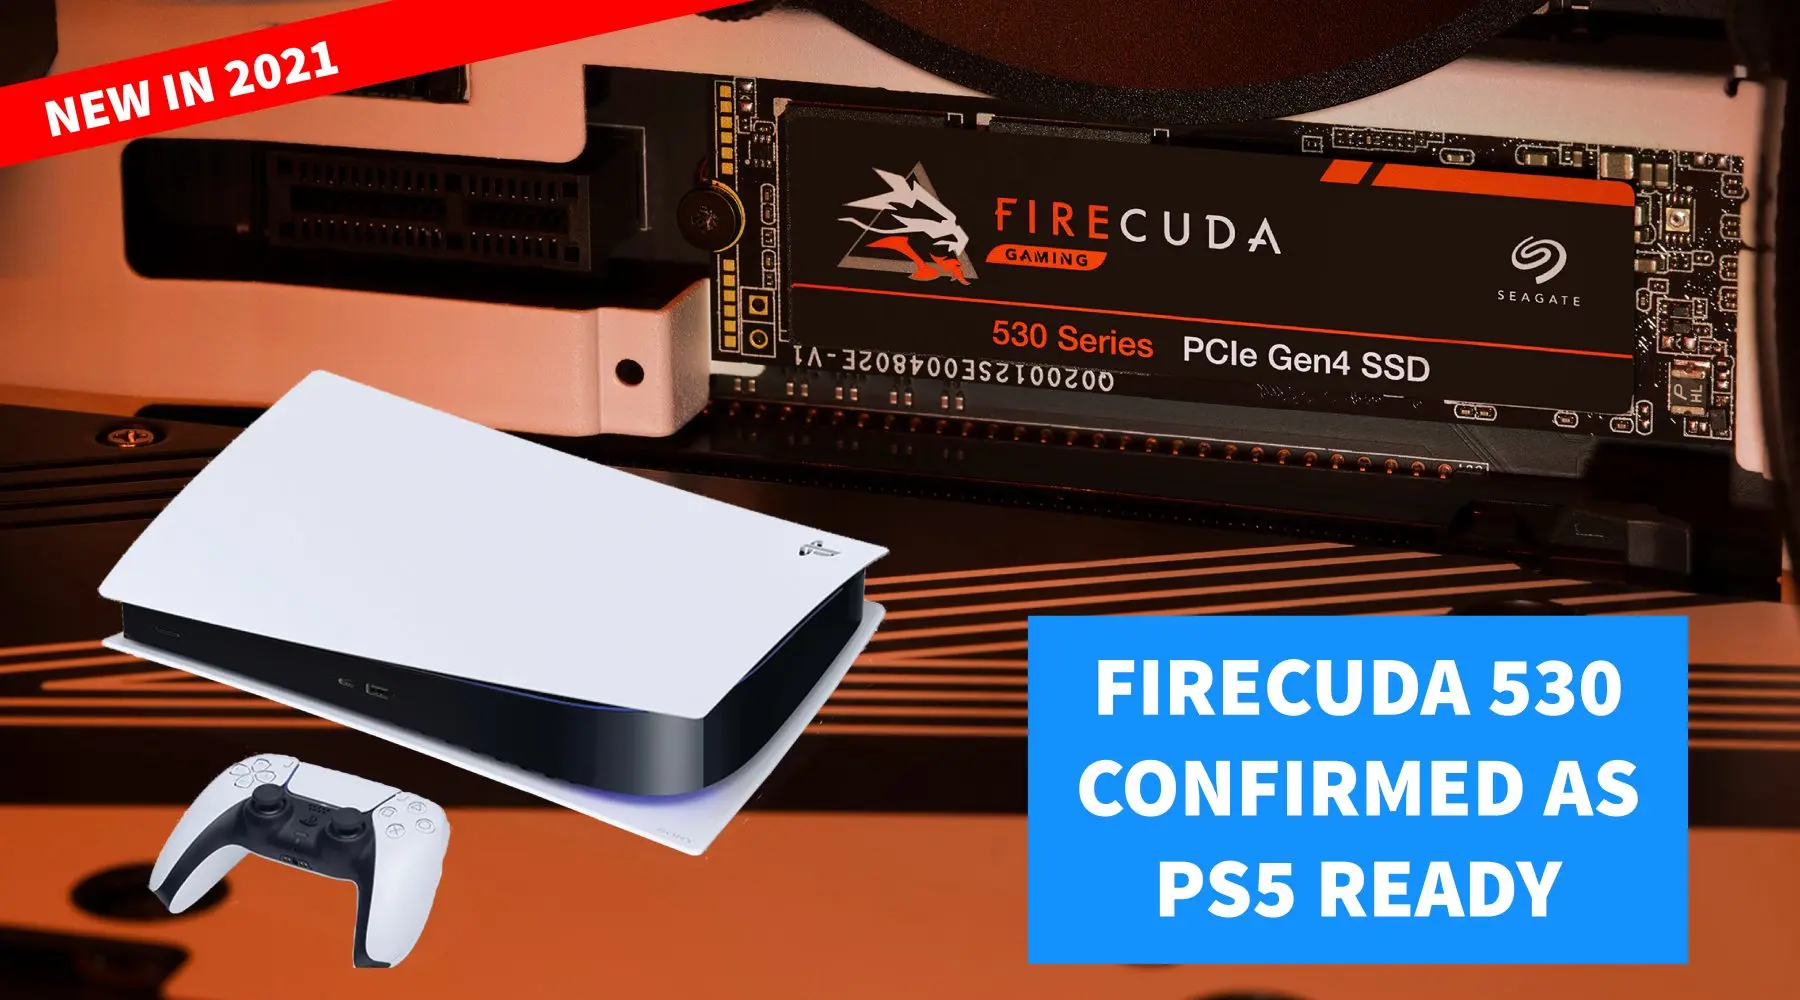 Seagate confirms FireCuda 530 is PlayStation 5 ready